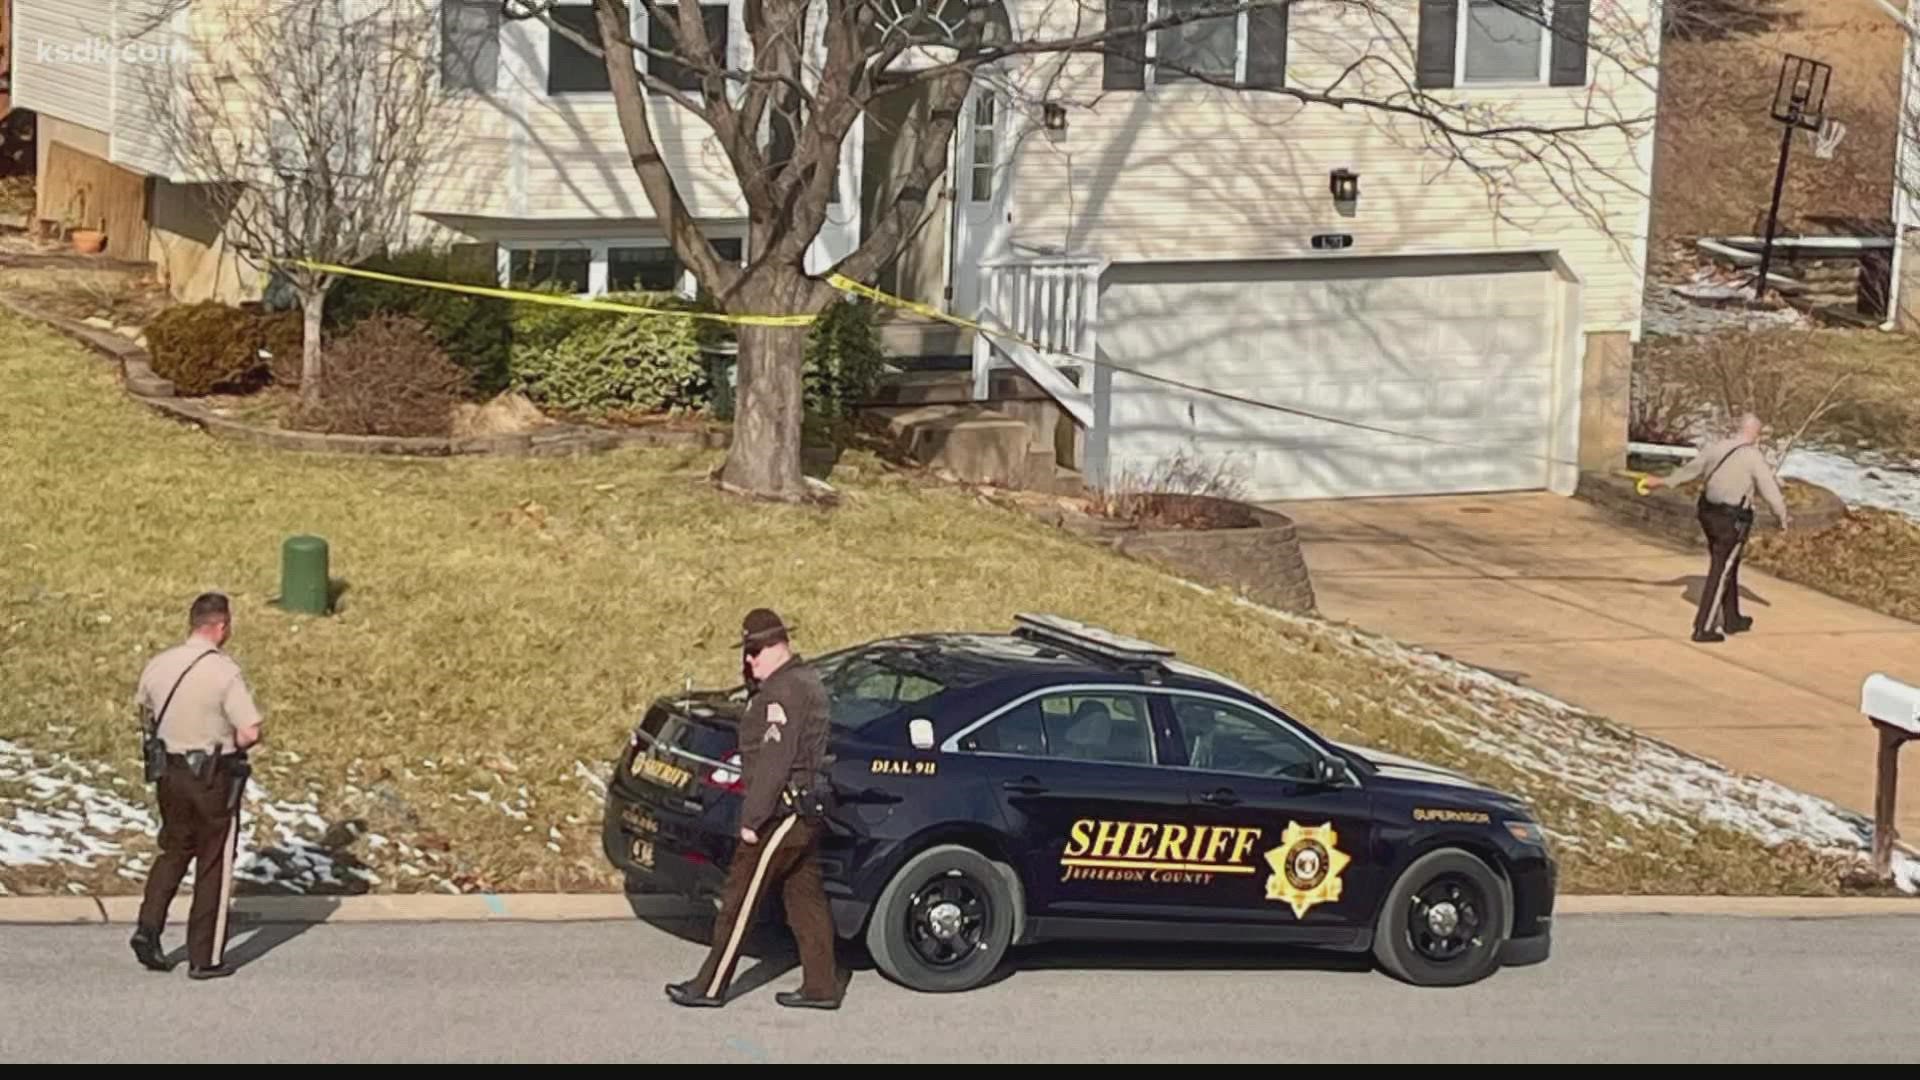 Deputies found a man with a gun in his hand and a woman both shot dead inside a home in Jefferson County.